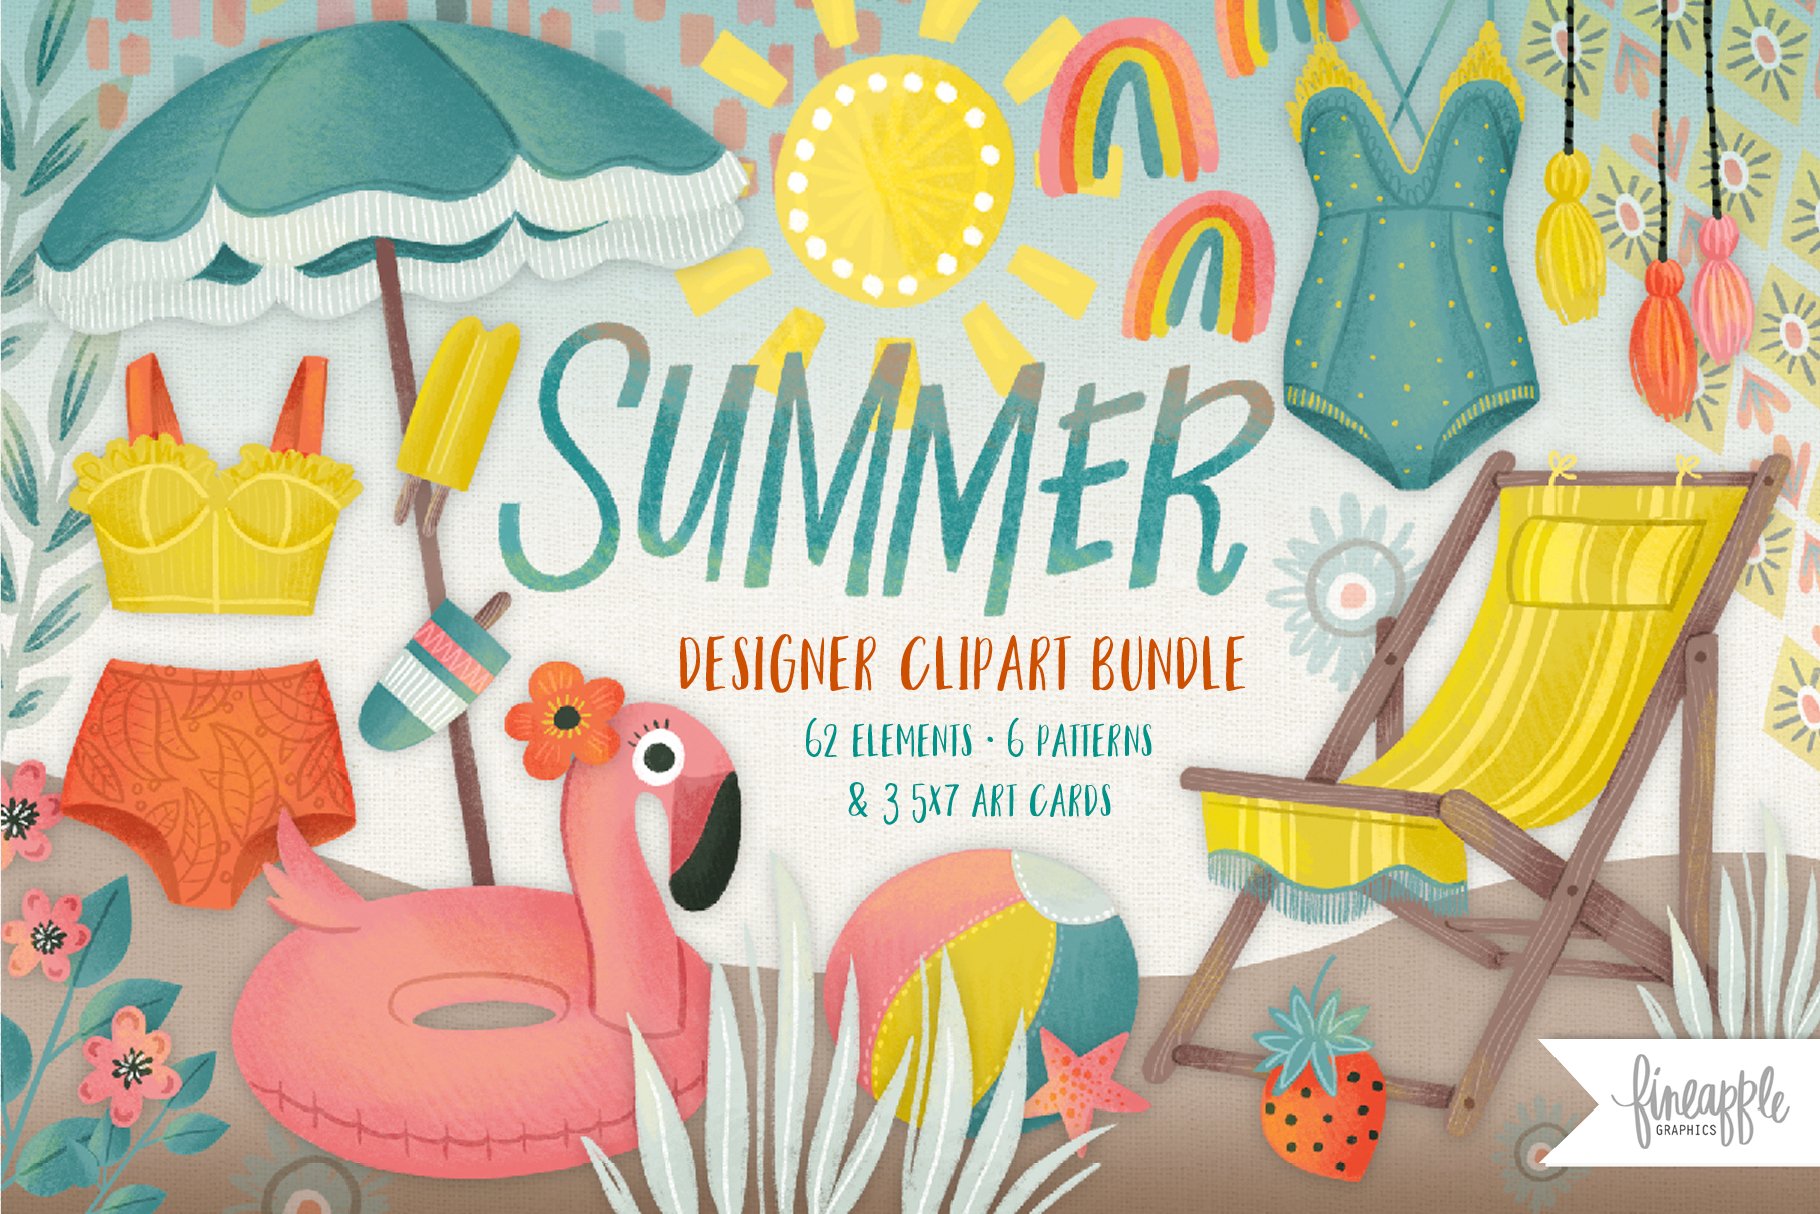 Summer Clip Art cover image.